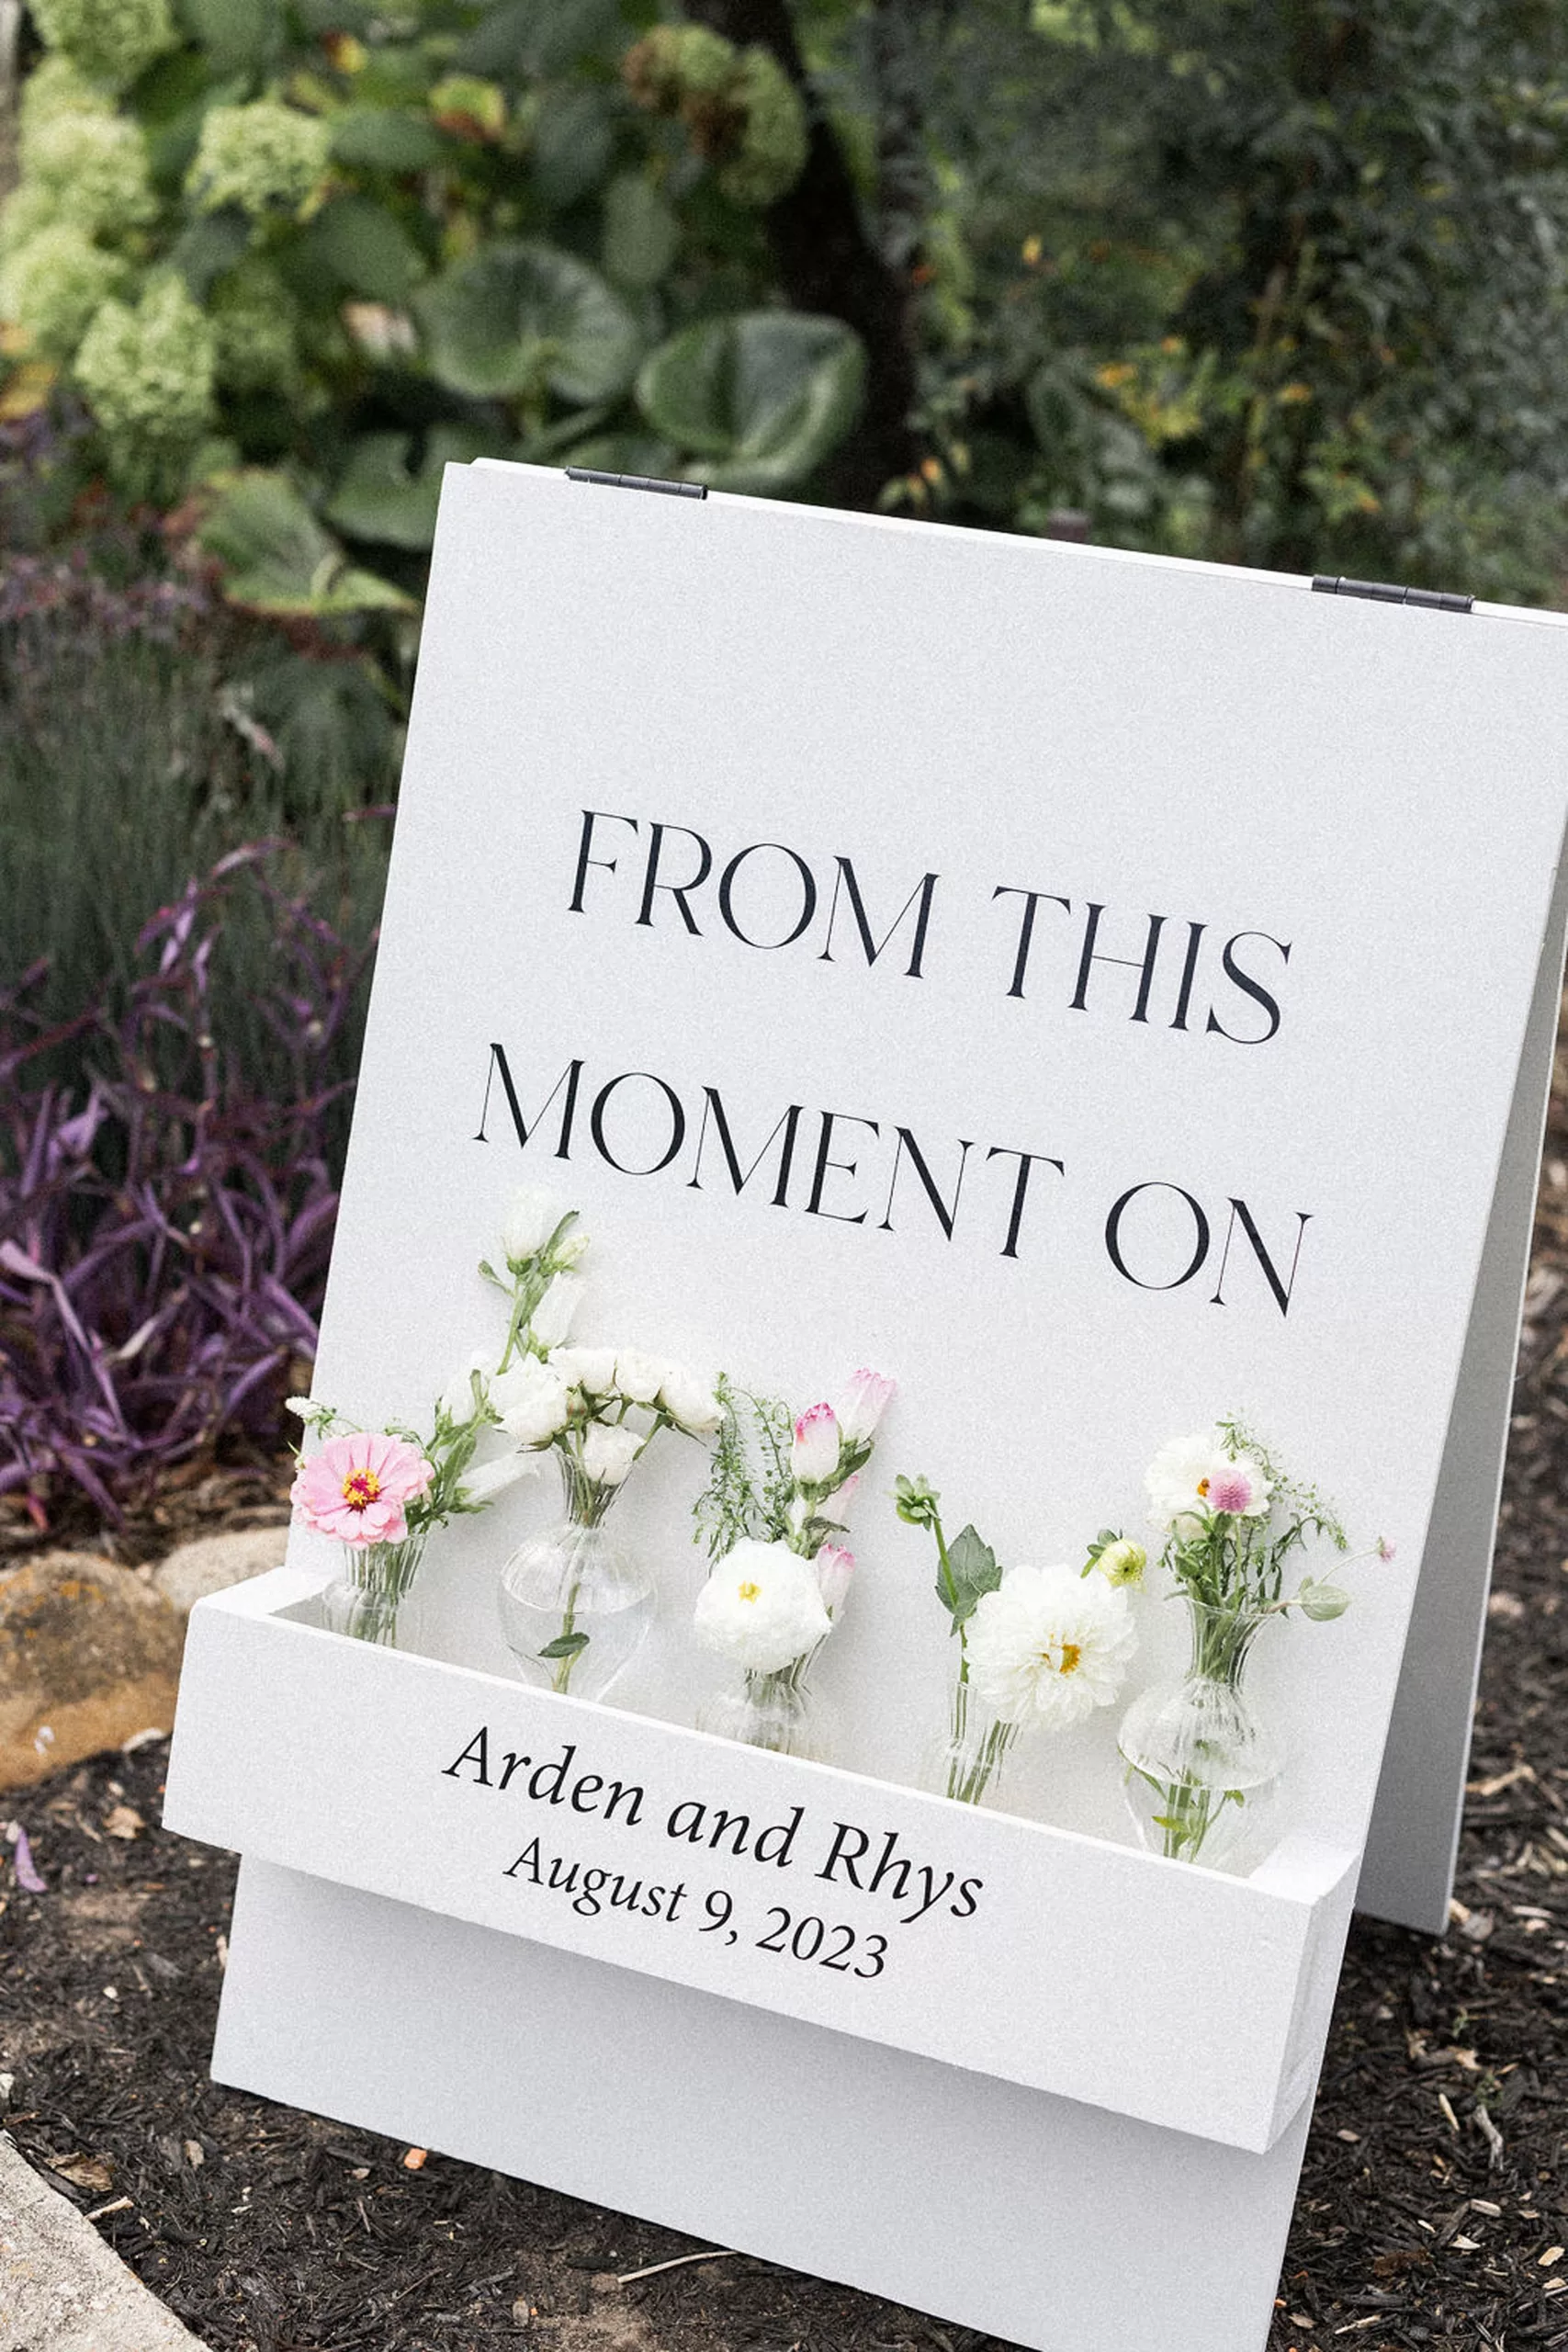 Details of a wedding sign set up in a garden with florals